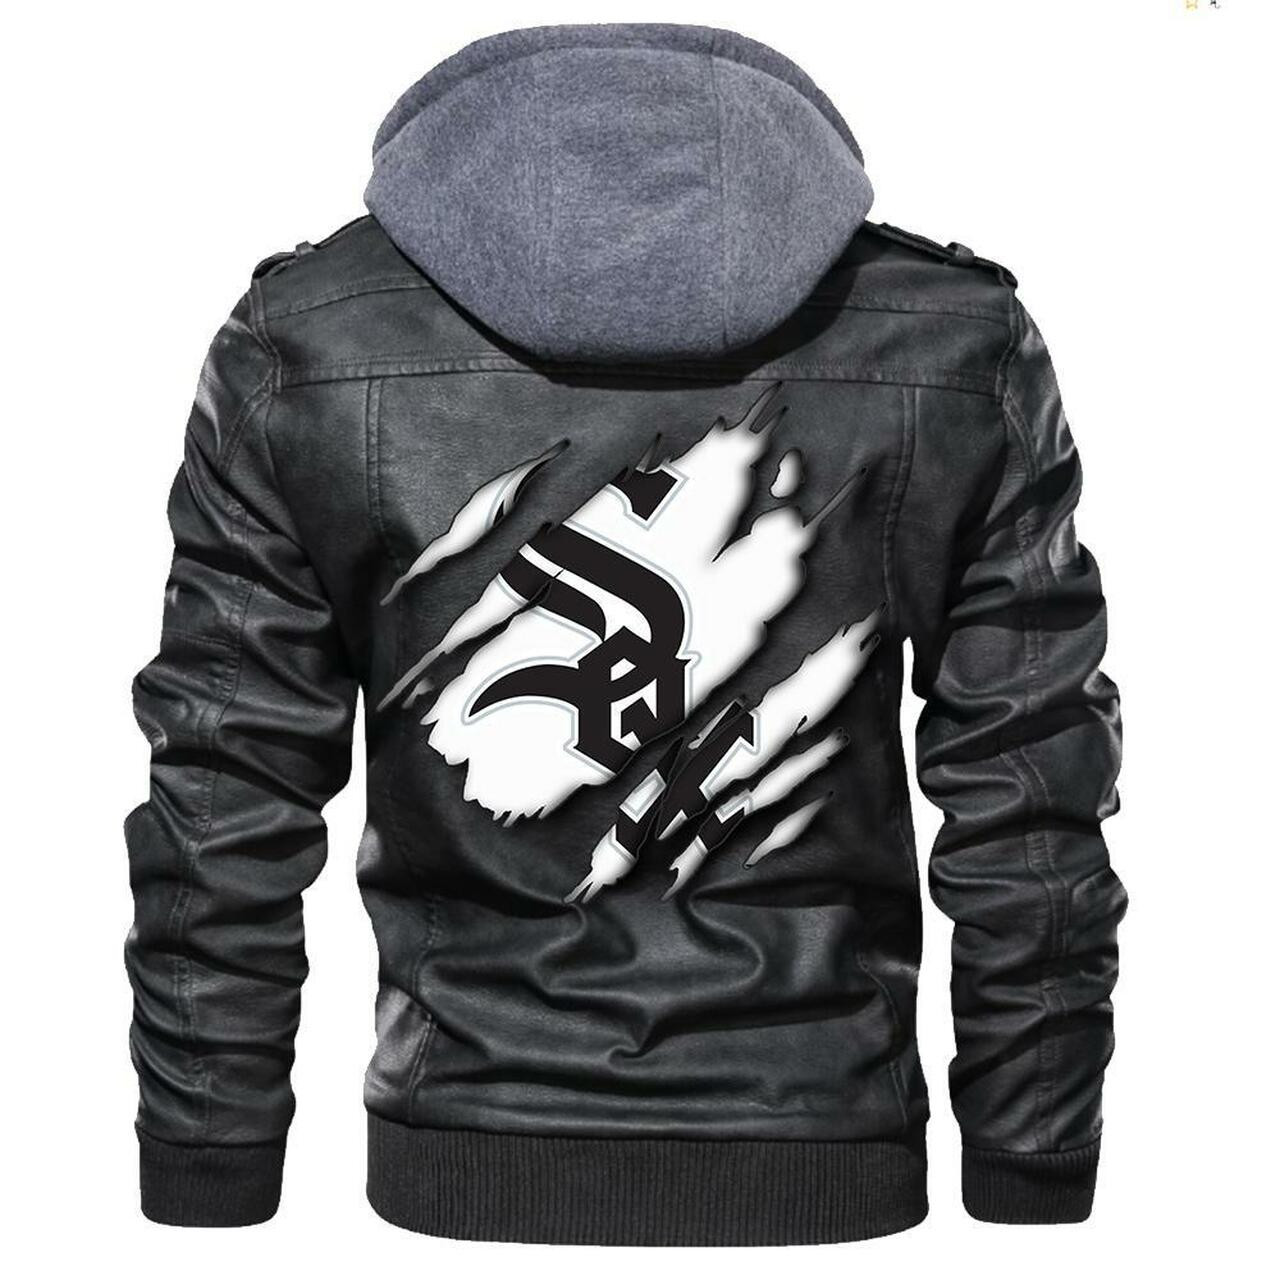 Our store has all of the latest leather jacket 224